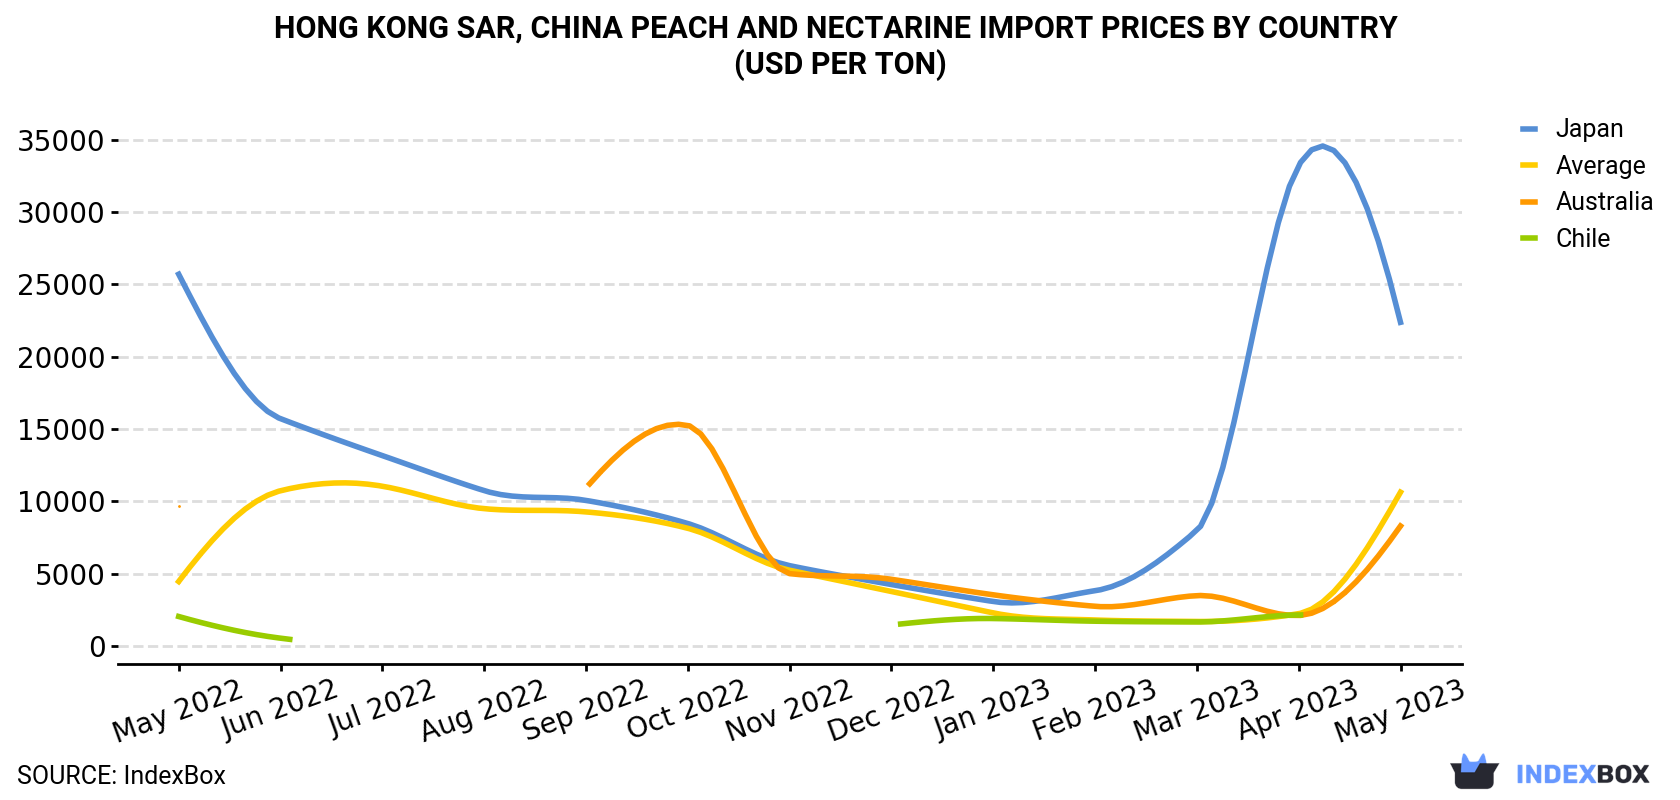 Hong Kong Peach And Nectarine Import Prices By Country (USD Per Ton)